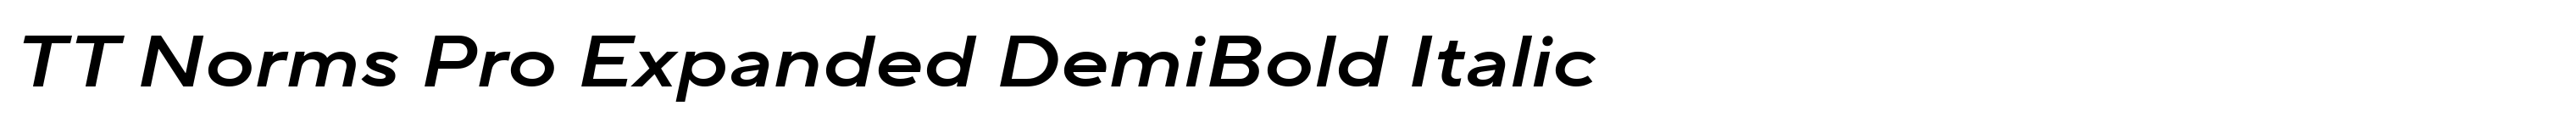 TT Norms Pro Expanded DemiBold Italic